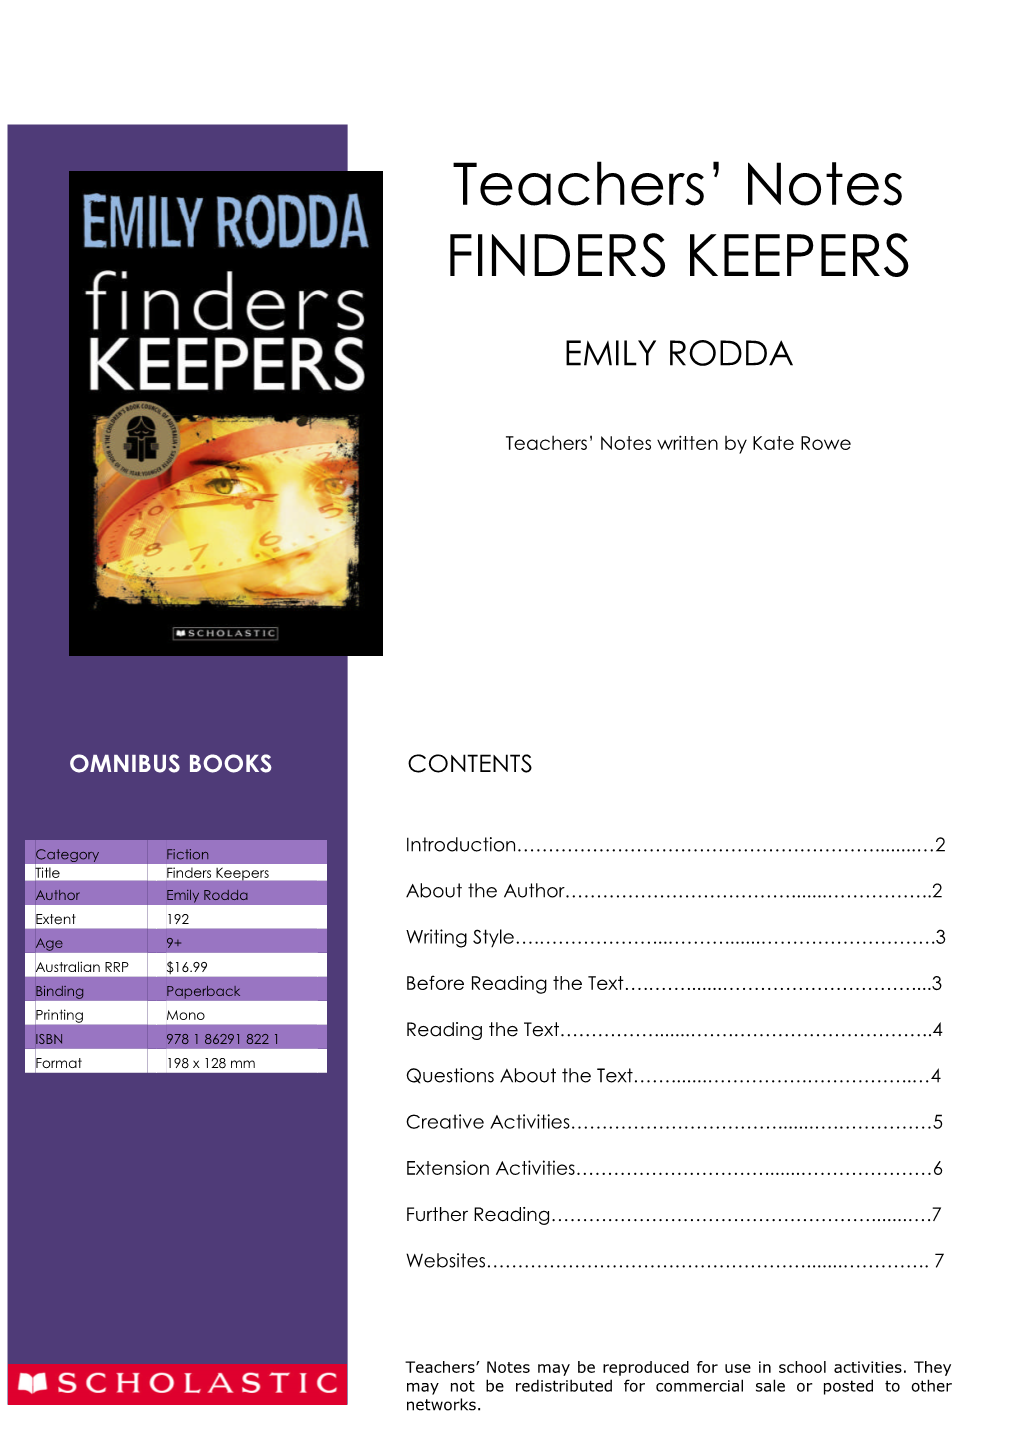 Teachers' Notes FINDERS KEEPERS